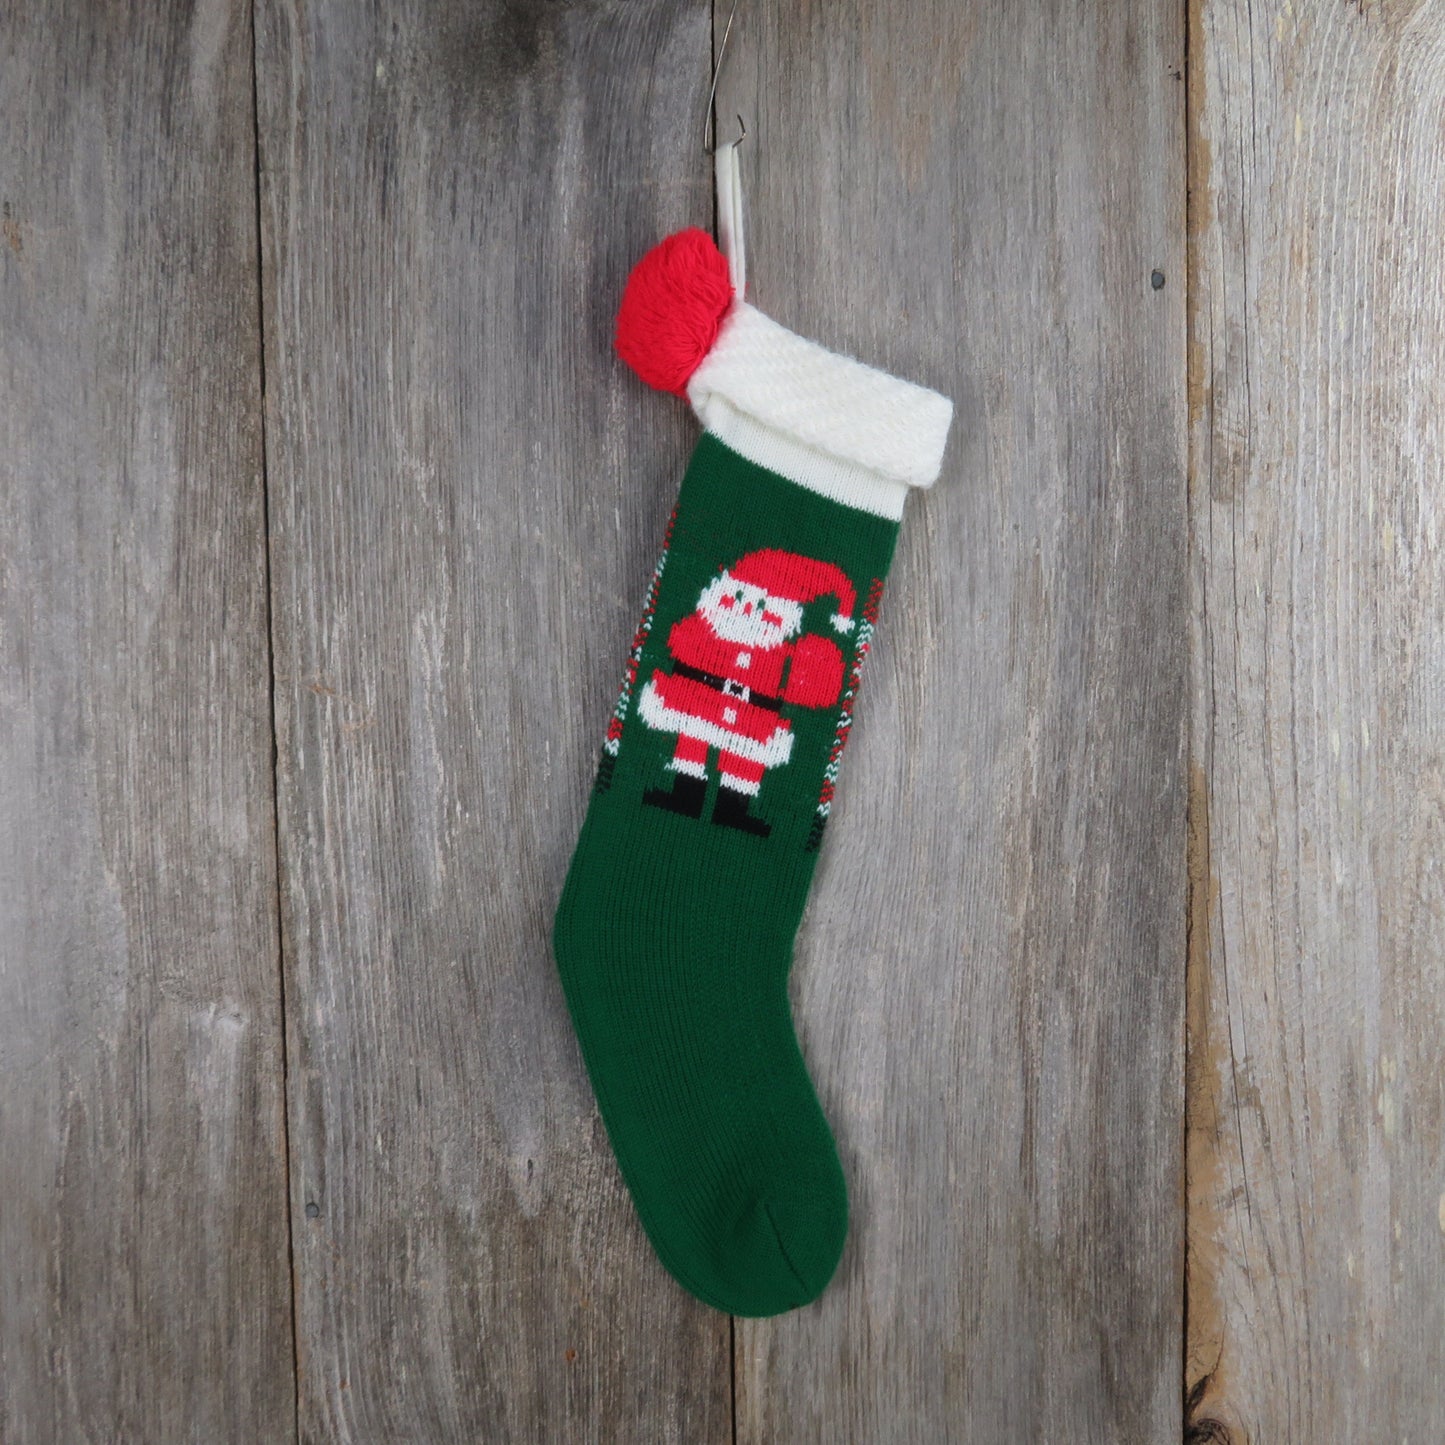 Vintage Santa Claus Knit Stocking Christmas Knitted GReen Red White Pom Pom